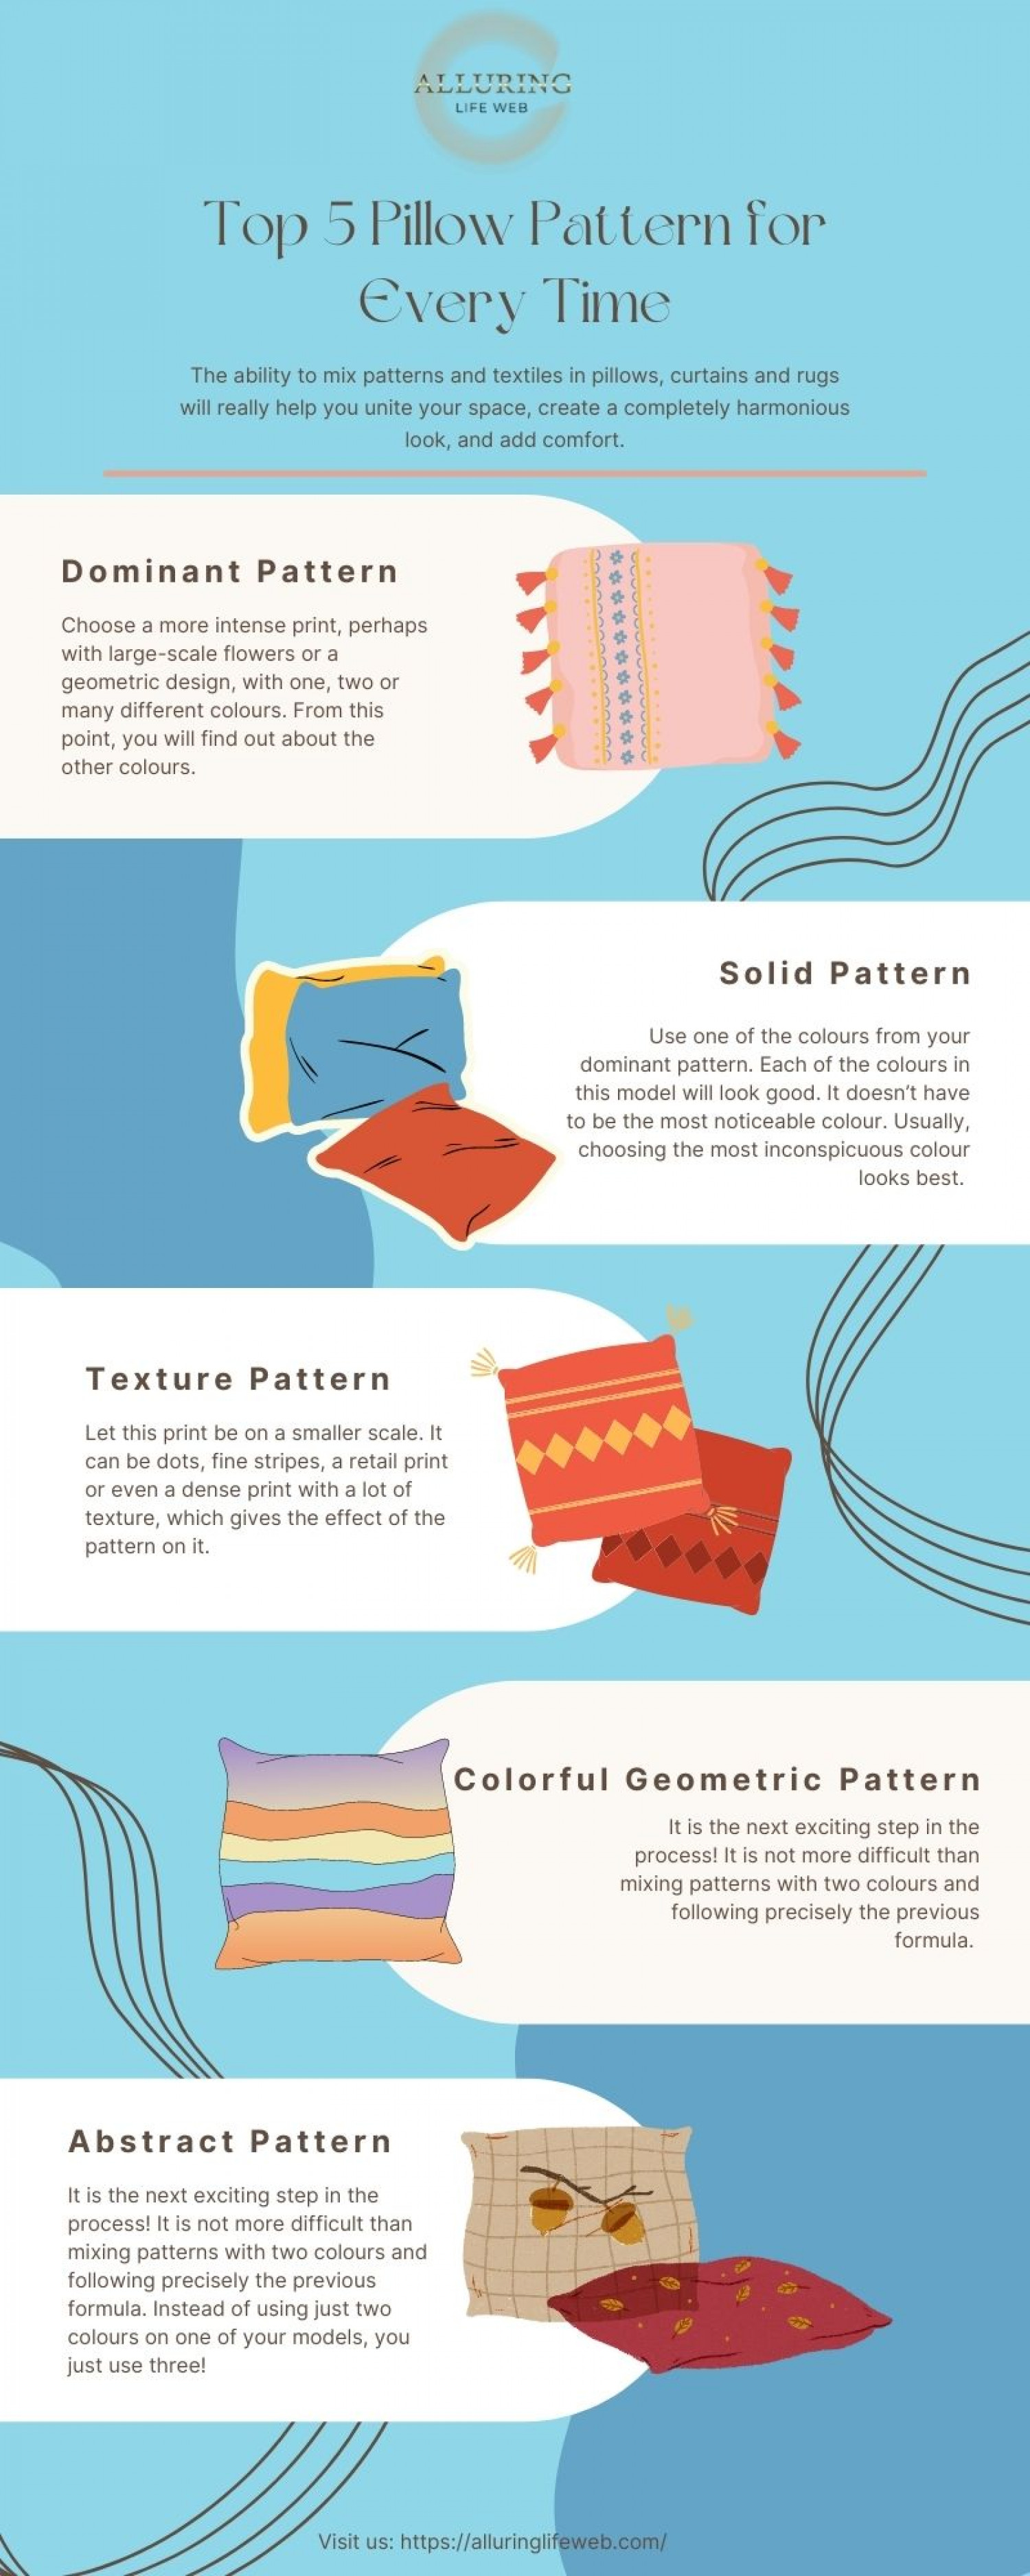 Top 5 Pillow Pattern for Every Time Infographic